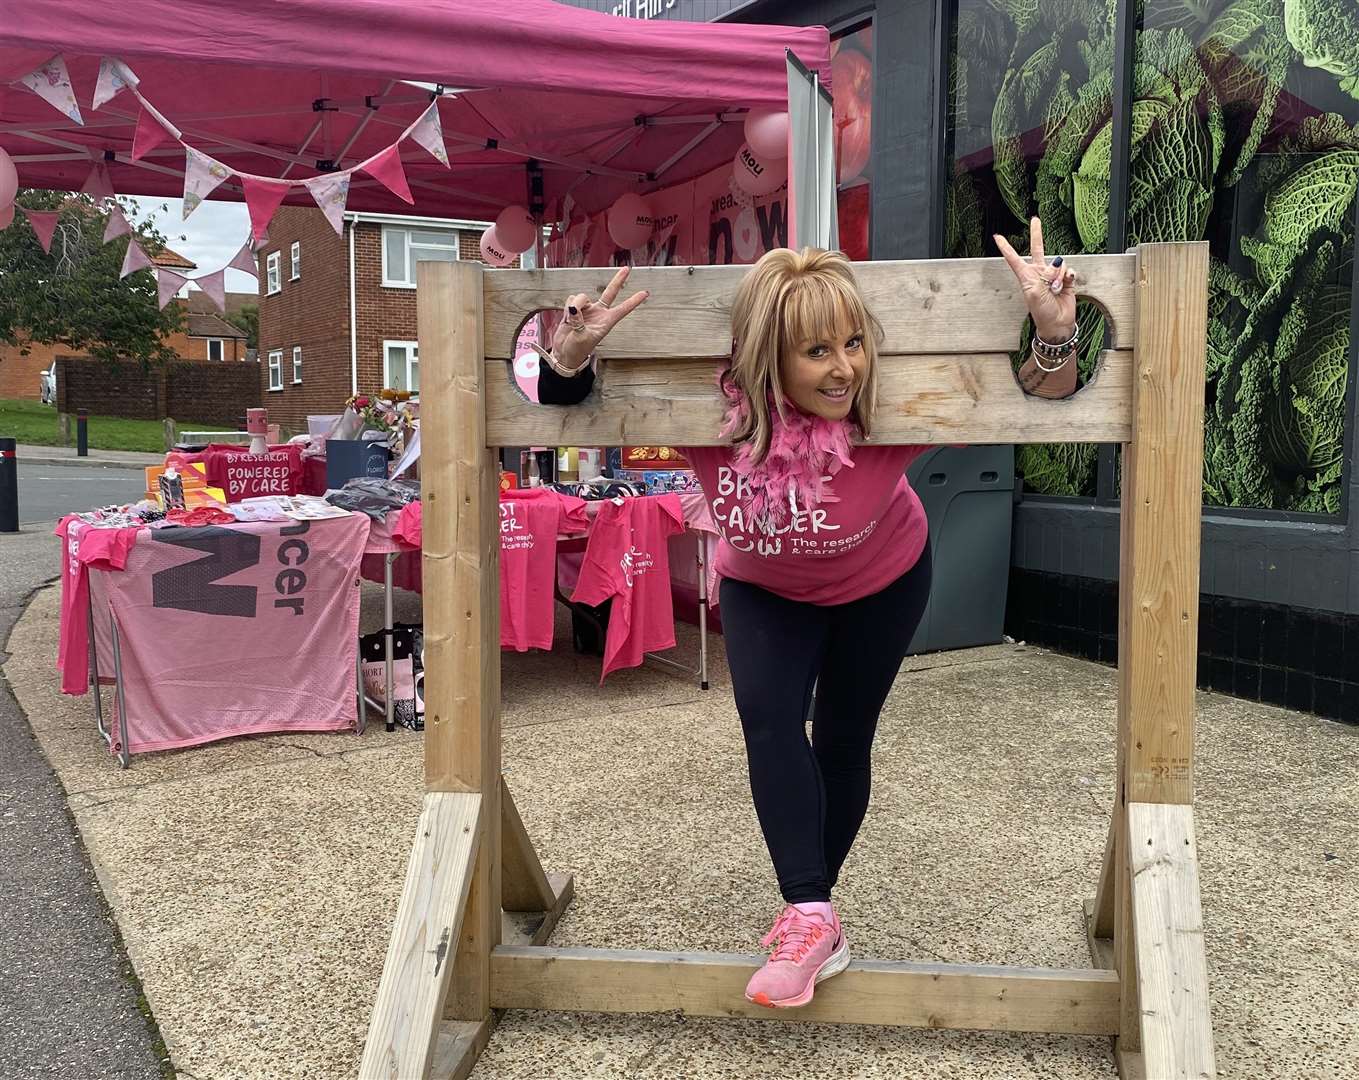 Kerry Banks BEM in the stocks raising awareness for Breast Cancer Month in October